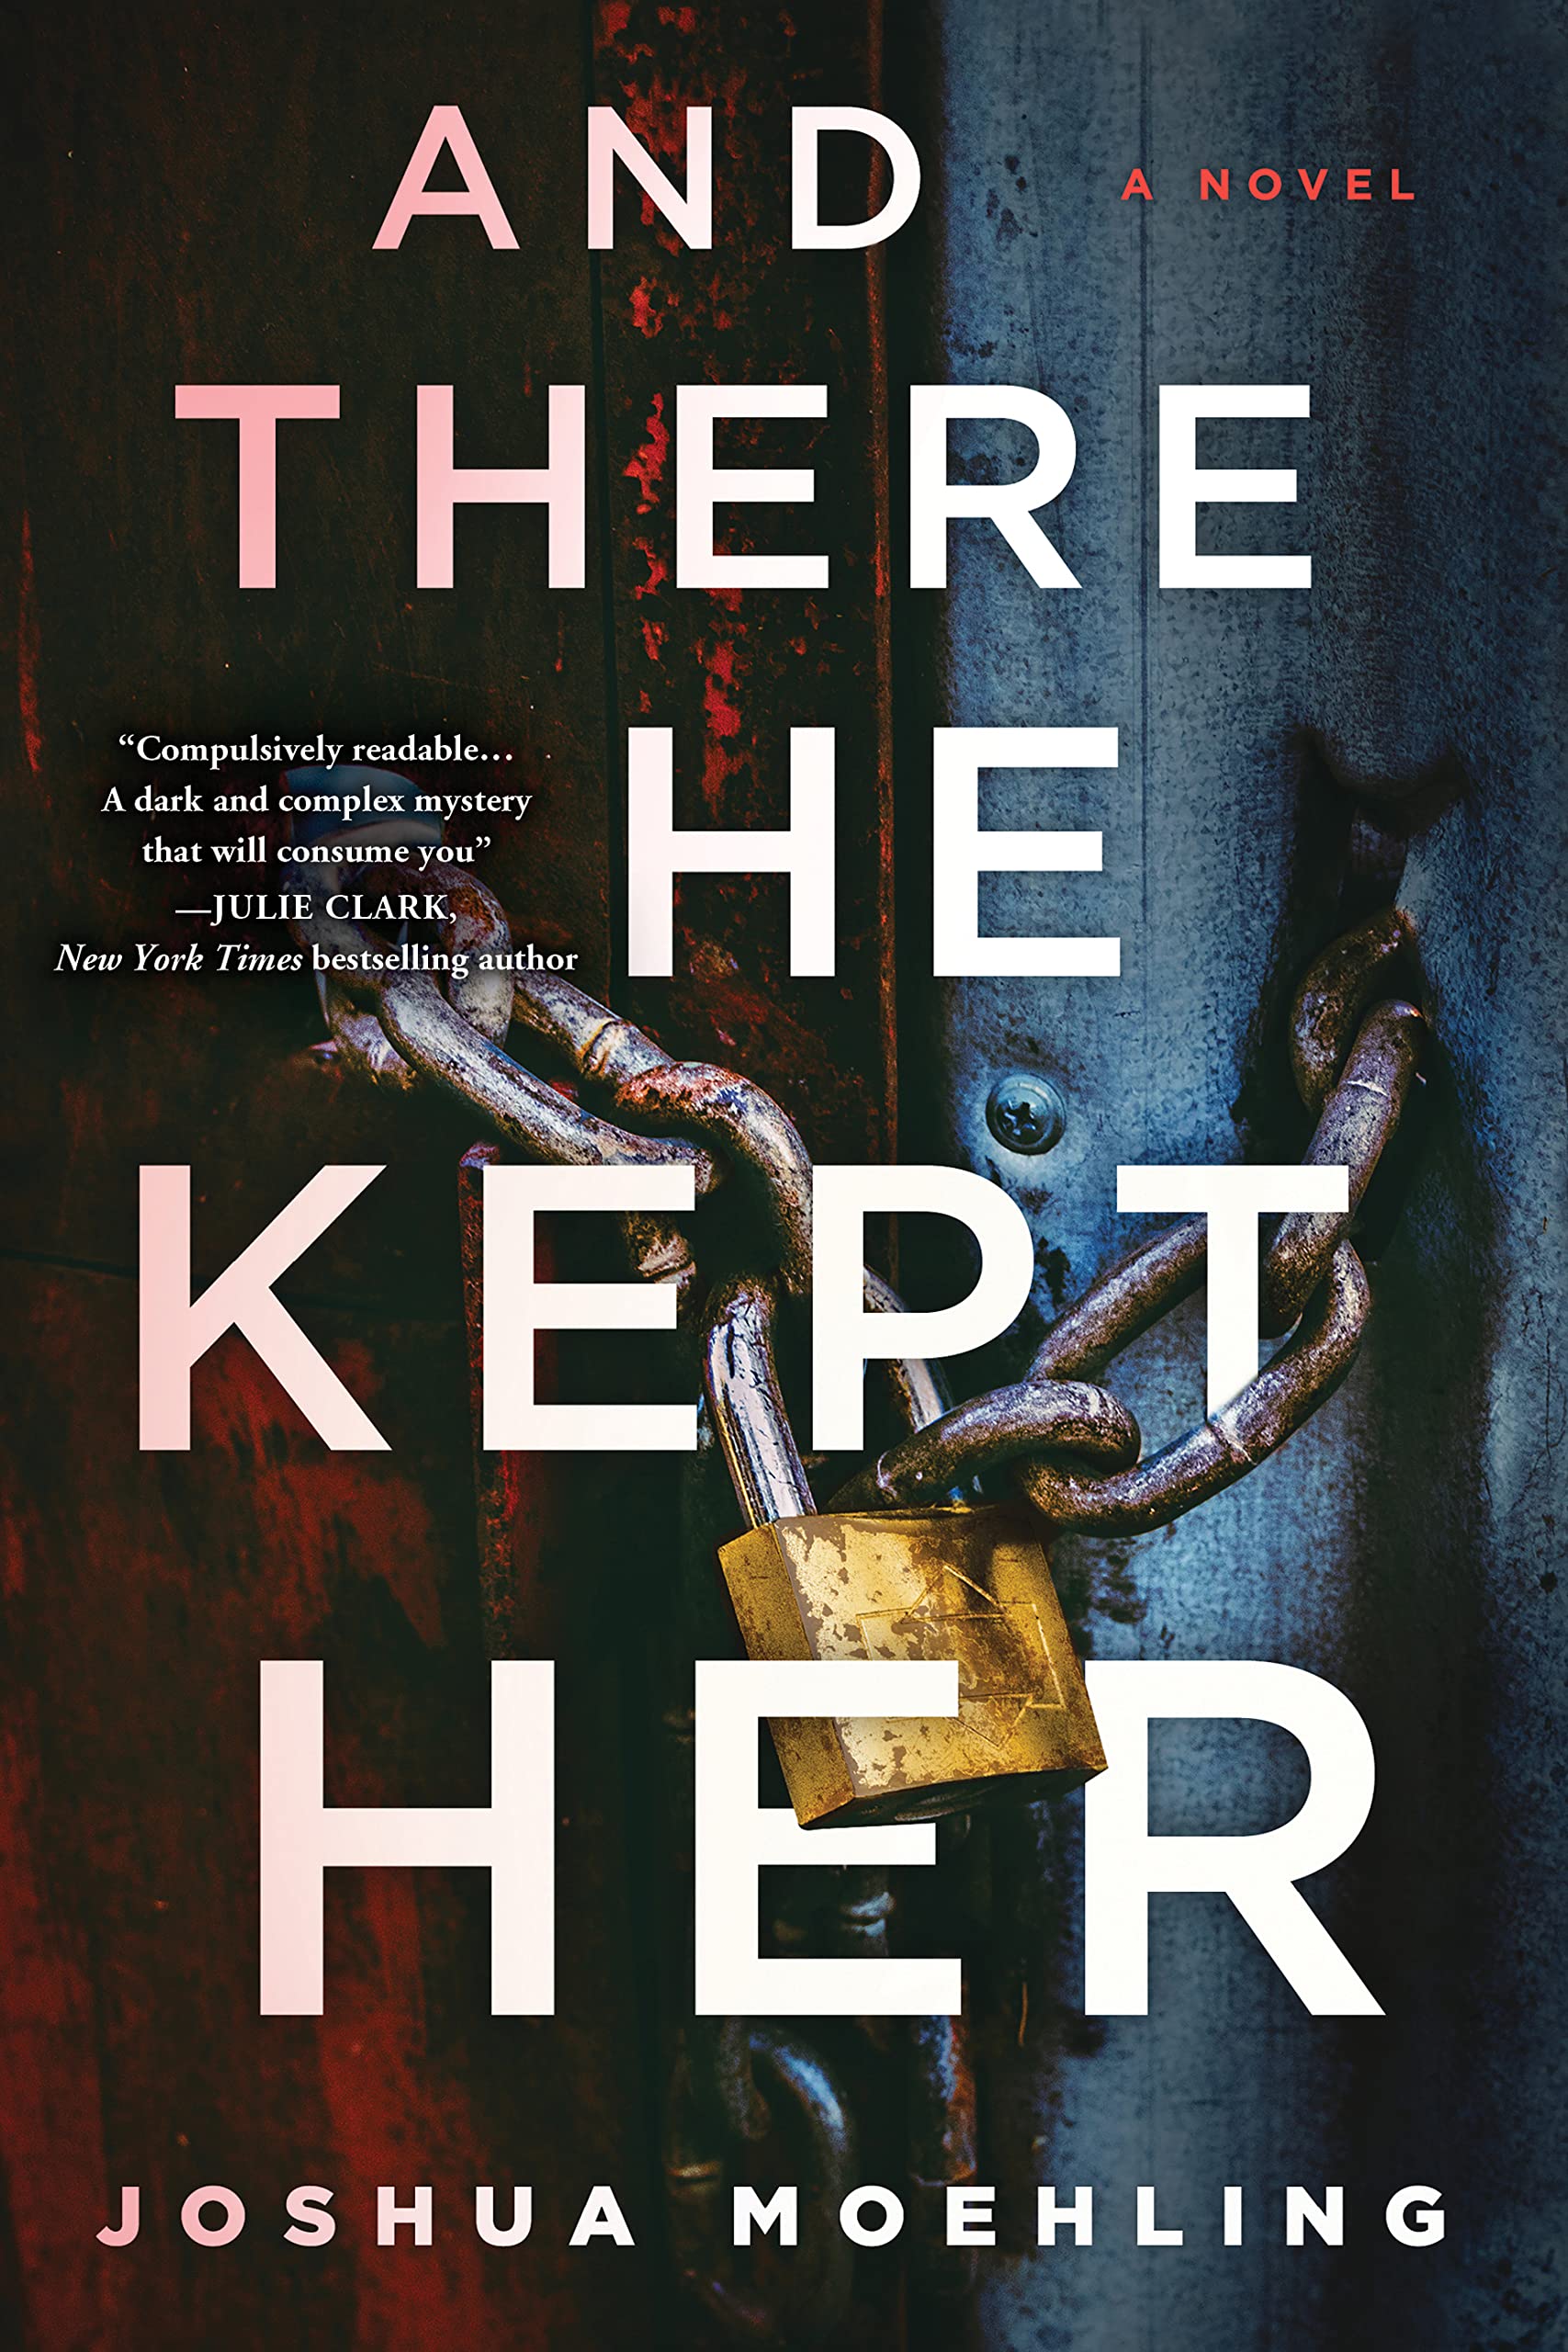 Cover of And There He Kept Her by Joshua Moehling